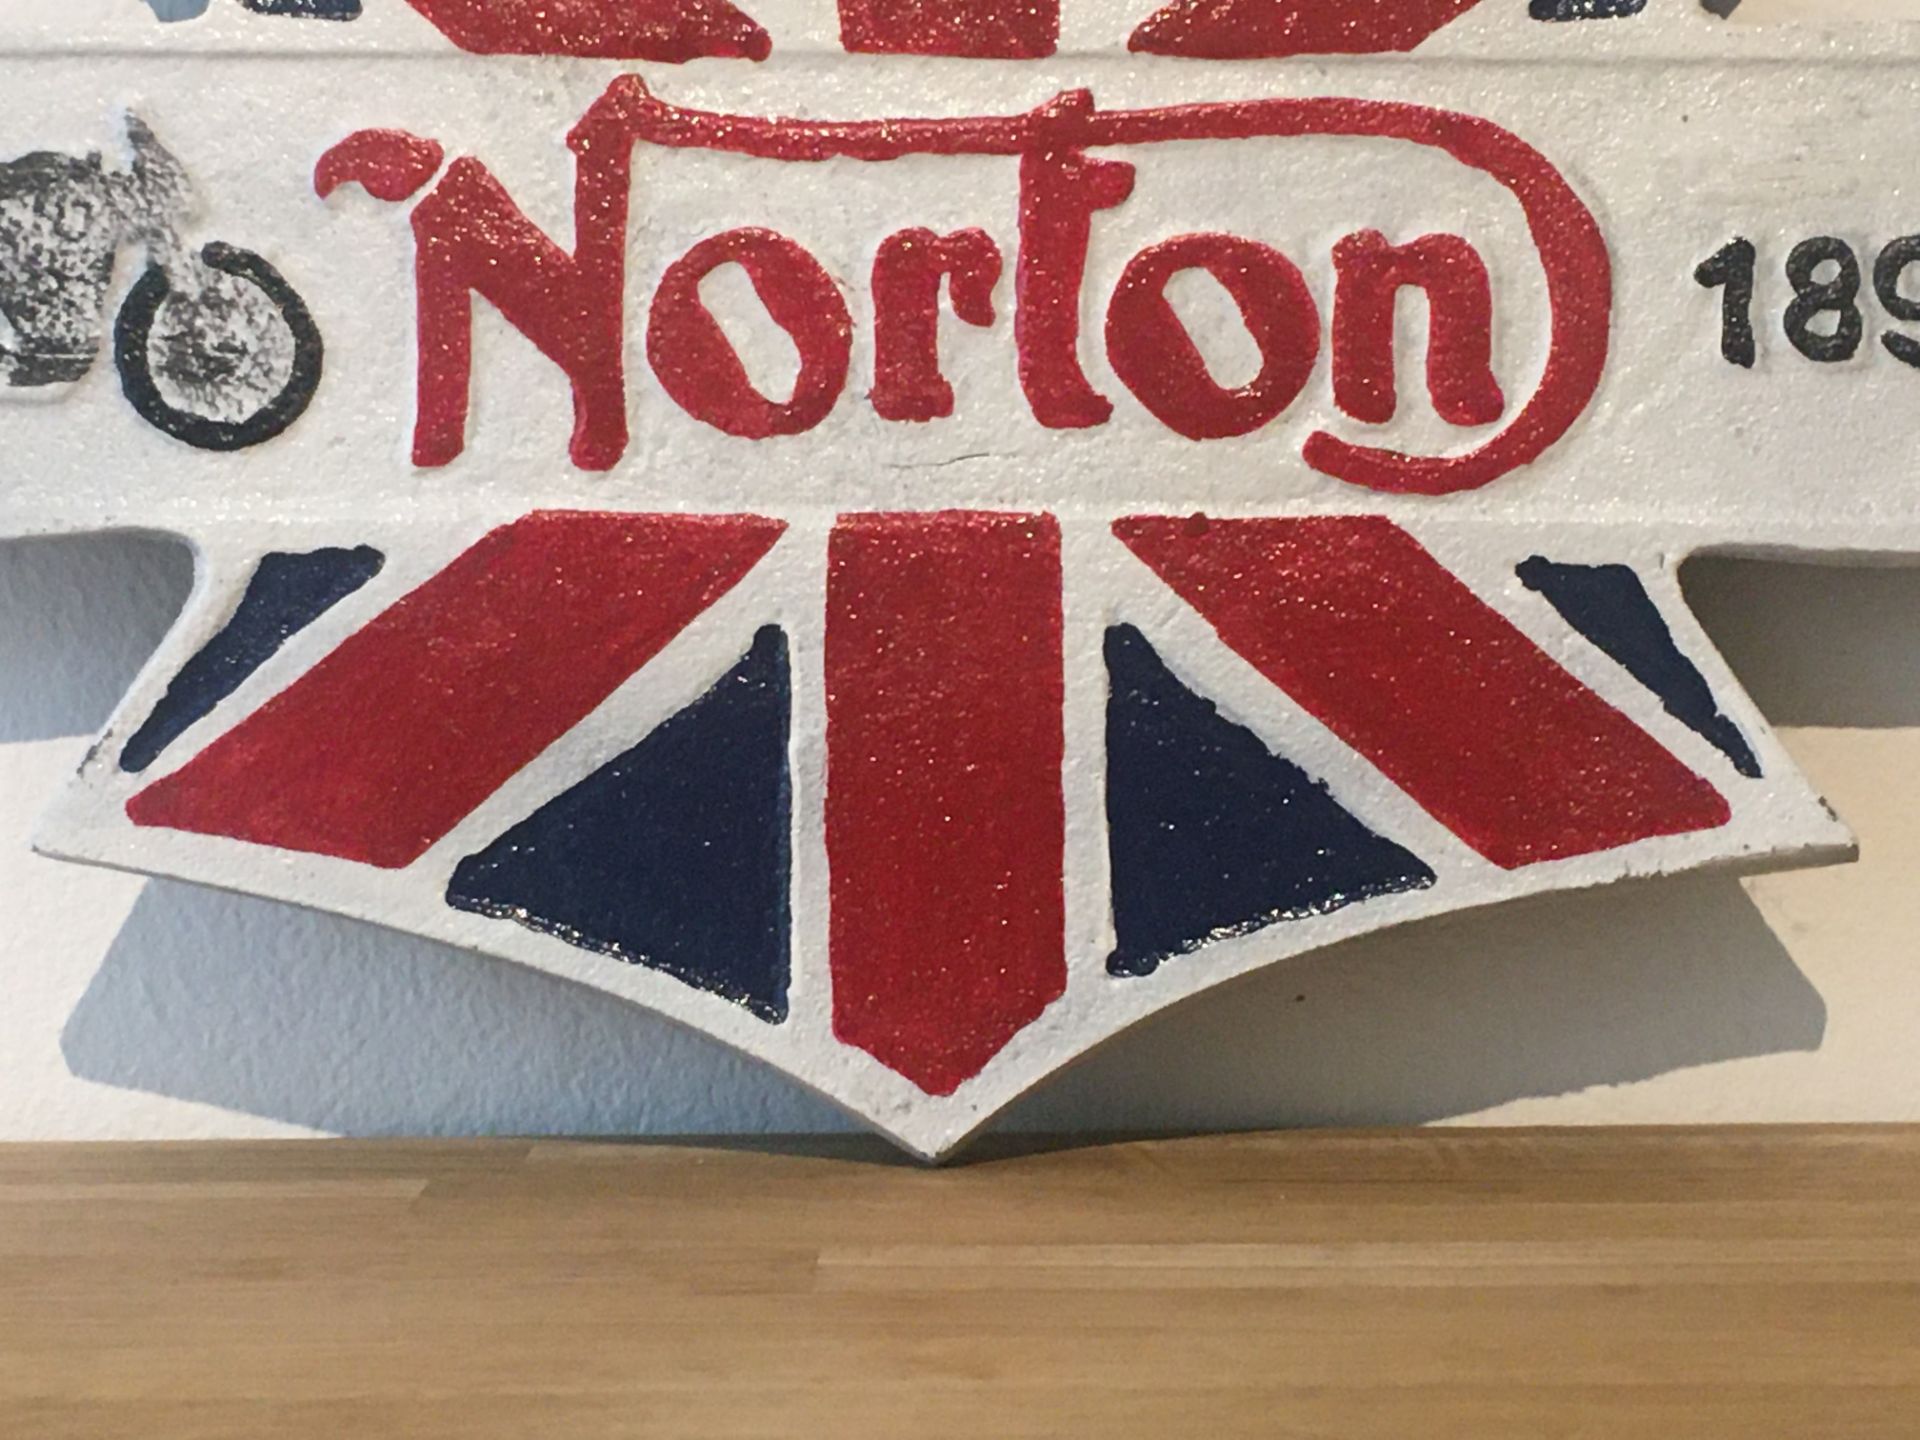 Norton Motorcycles 1898 Cast Iron Sign - Image 5 of 5